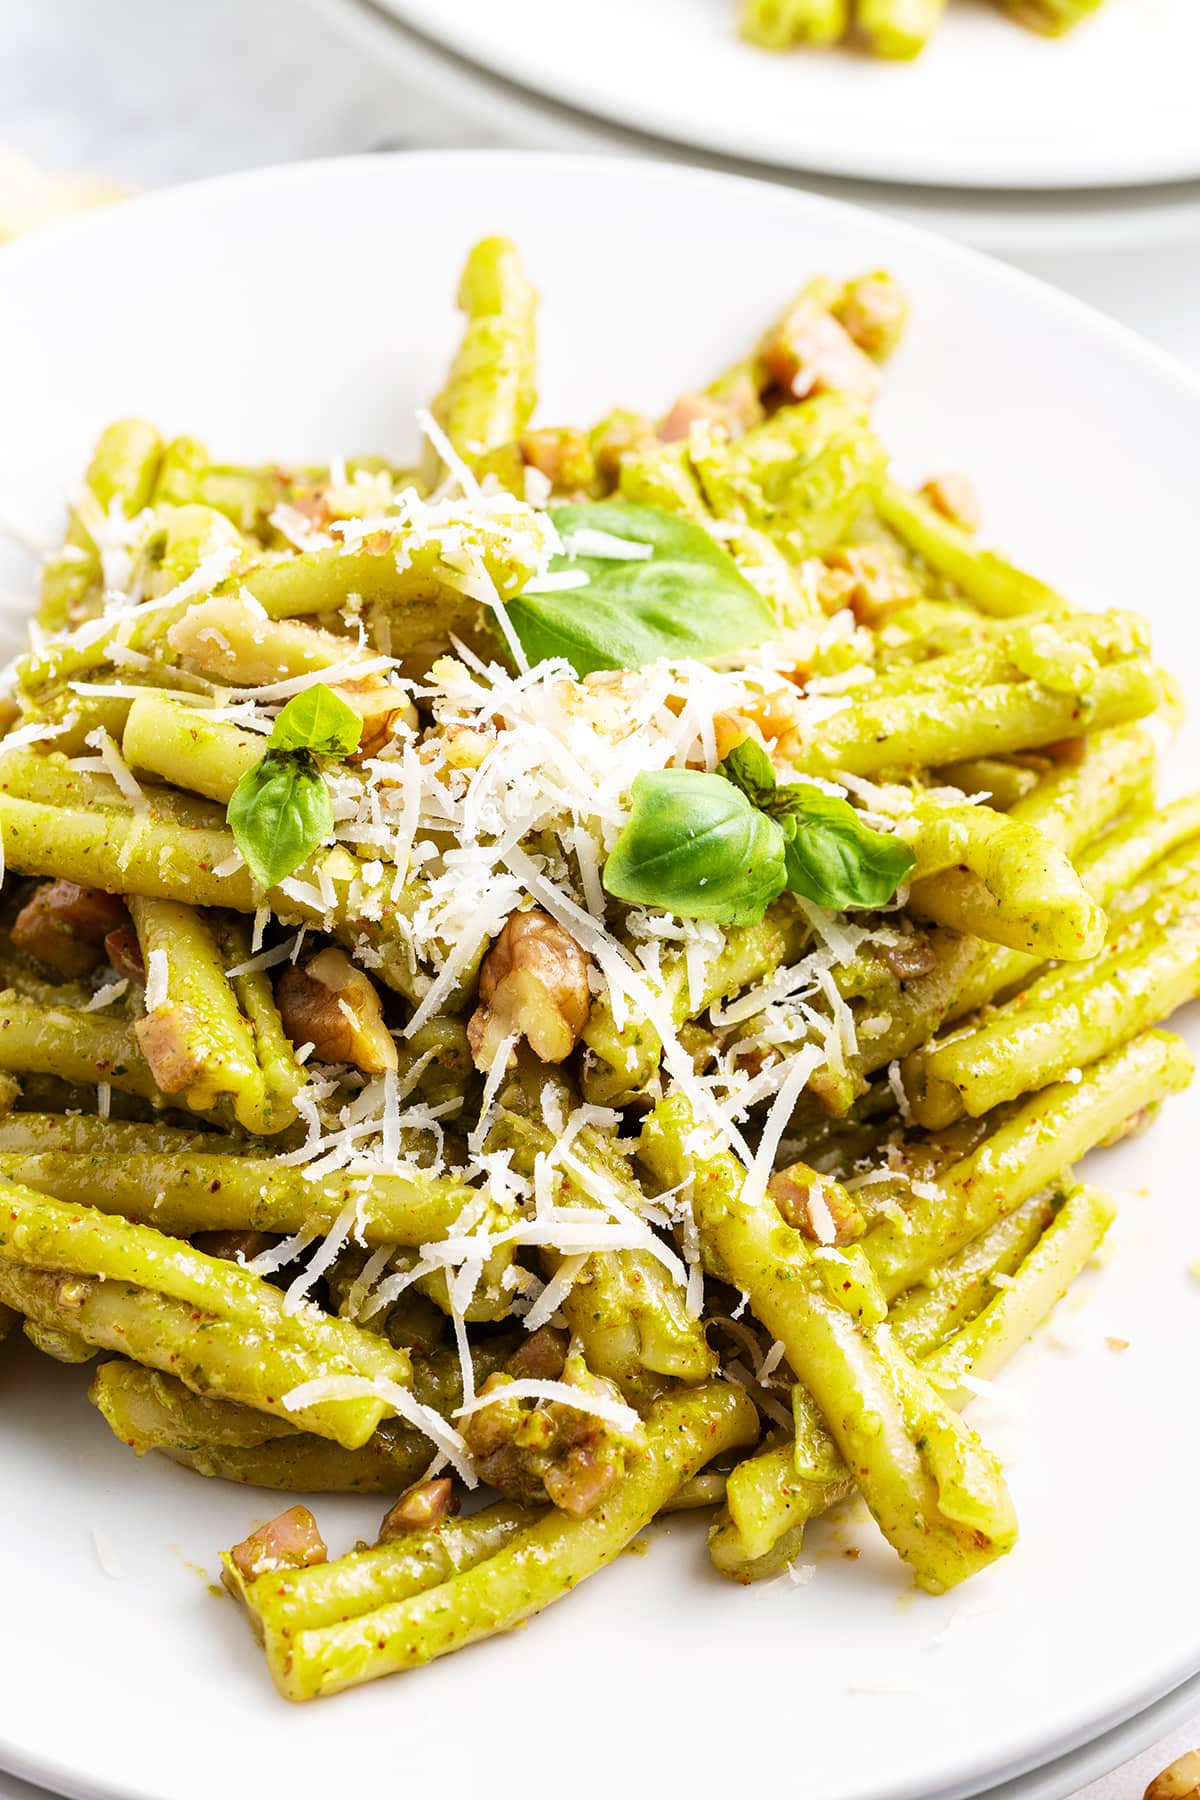 A plate of Casarecce Pasta with pesto sauce topped with shredded parmesan, and fresh basil.